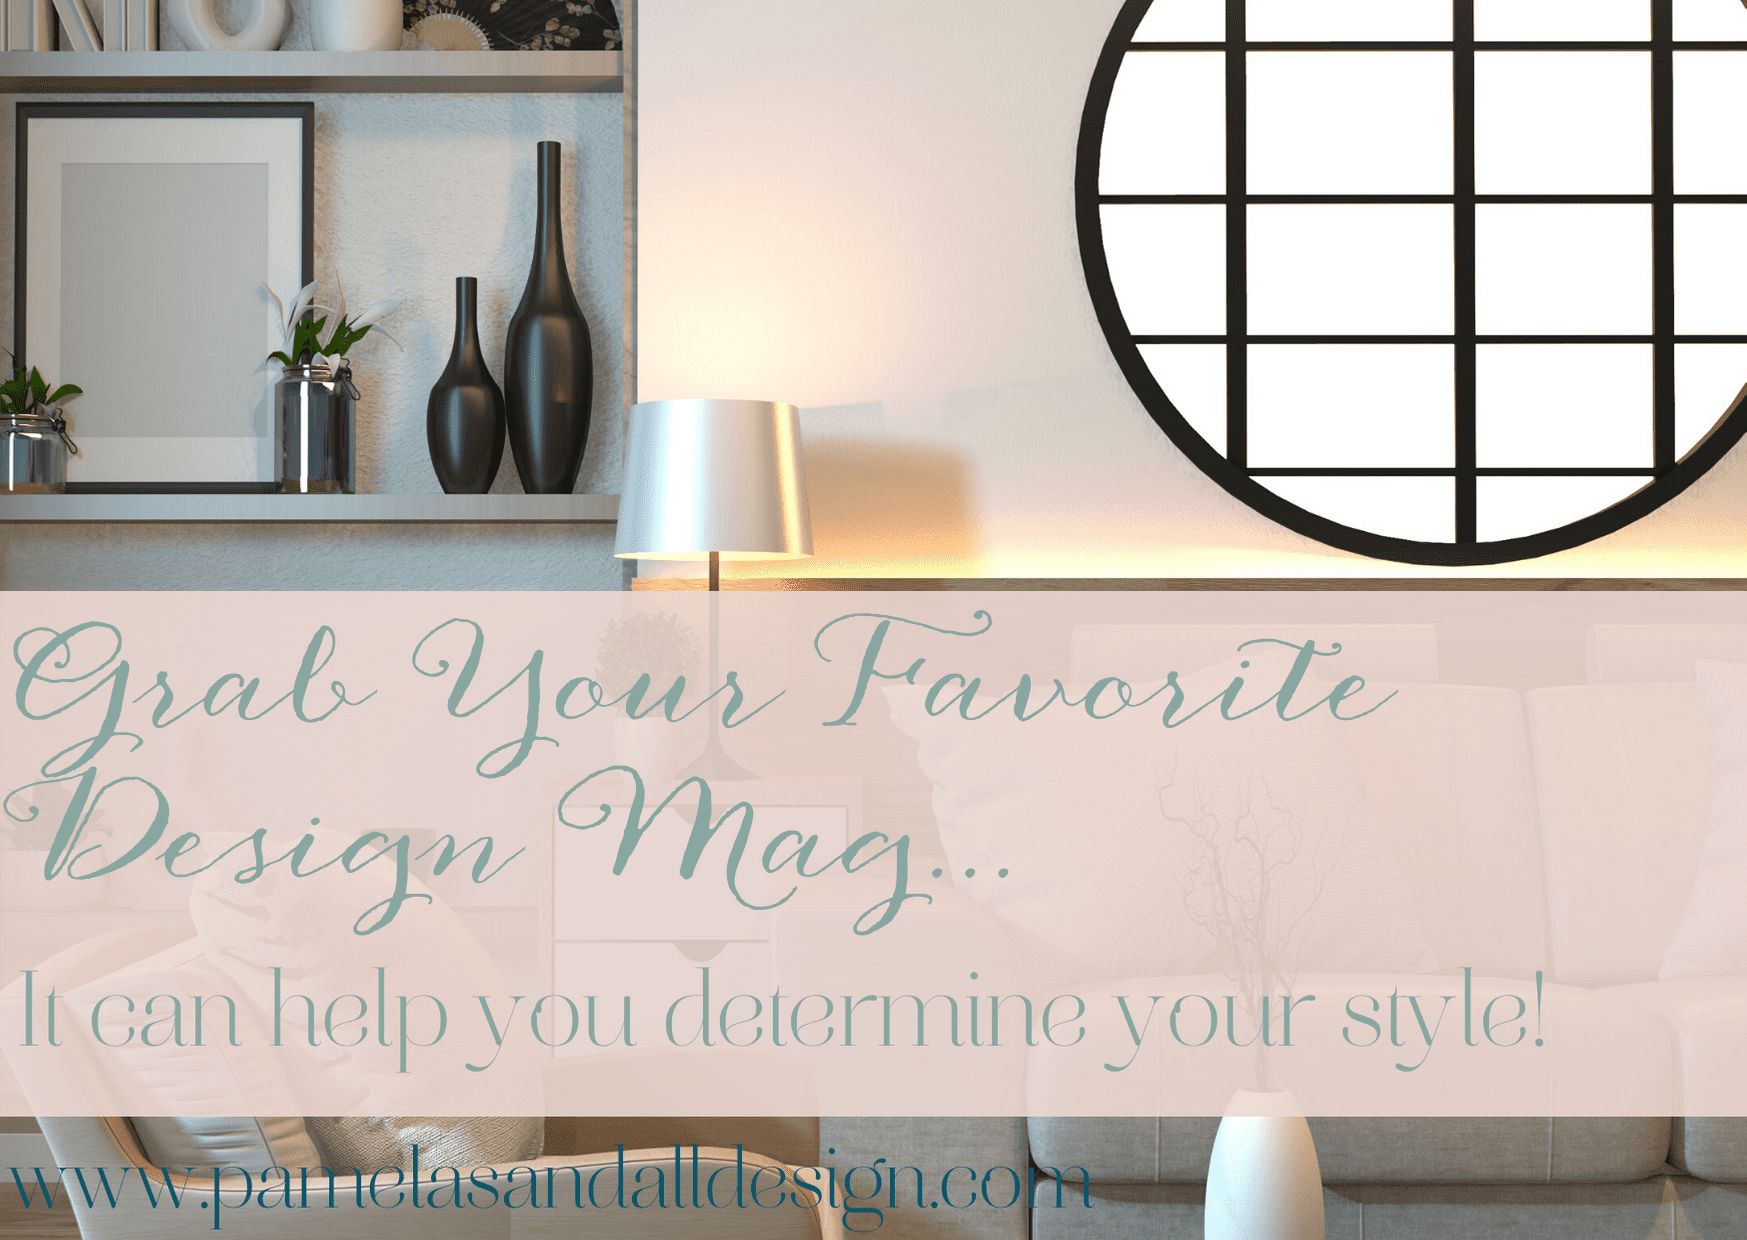 Beautiful Decorating Magazines – Use them to find your design style!